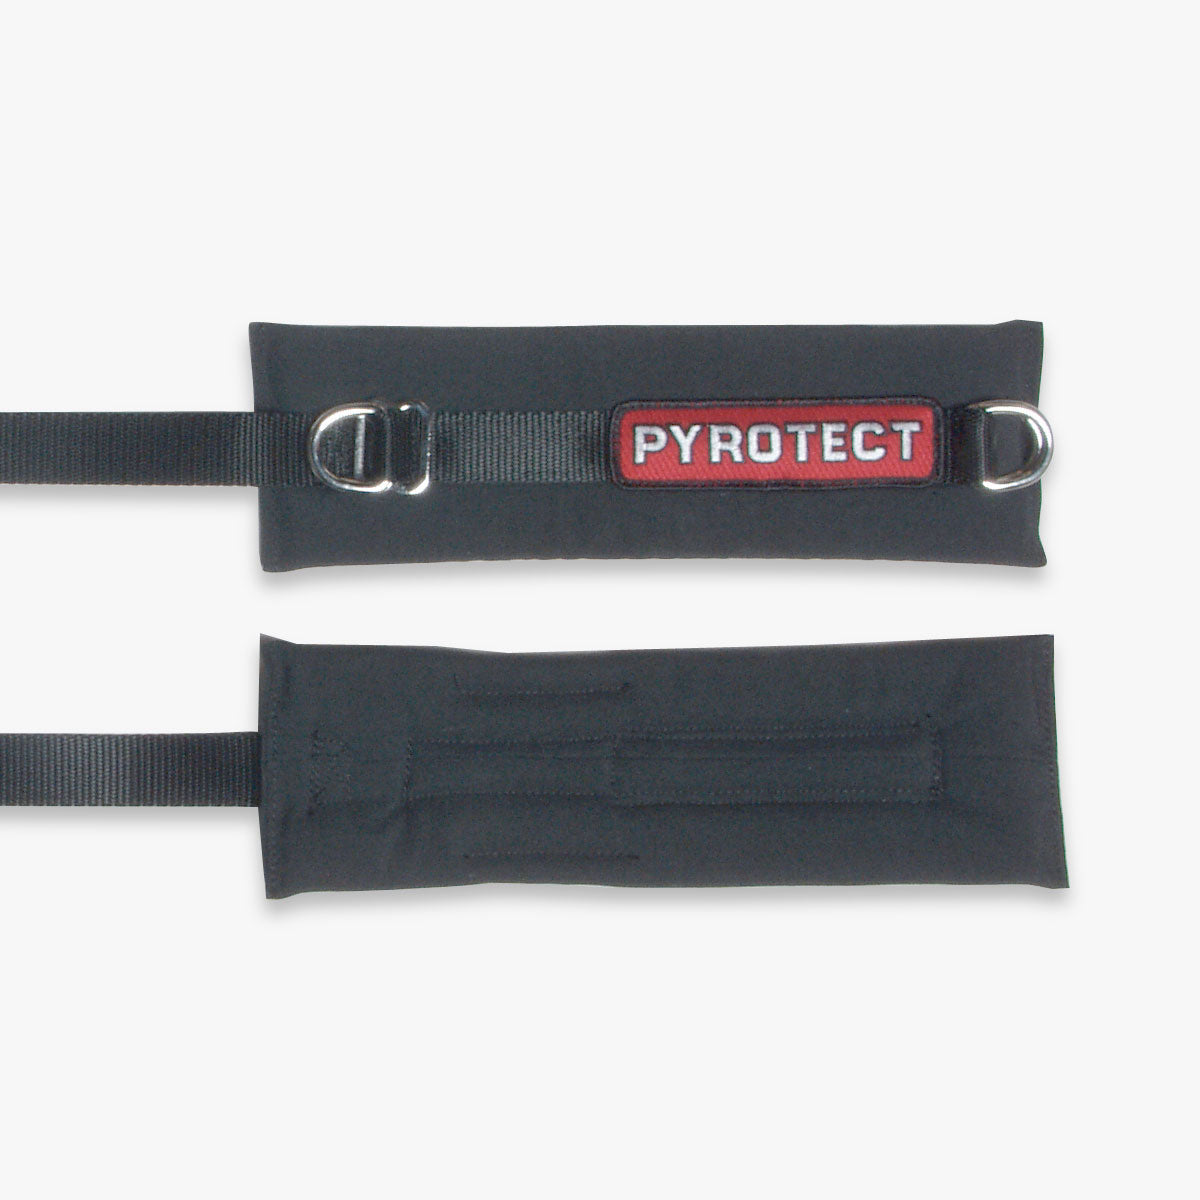 Pyrotect Adult Arm Restraints, Color: Black or Red